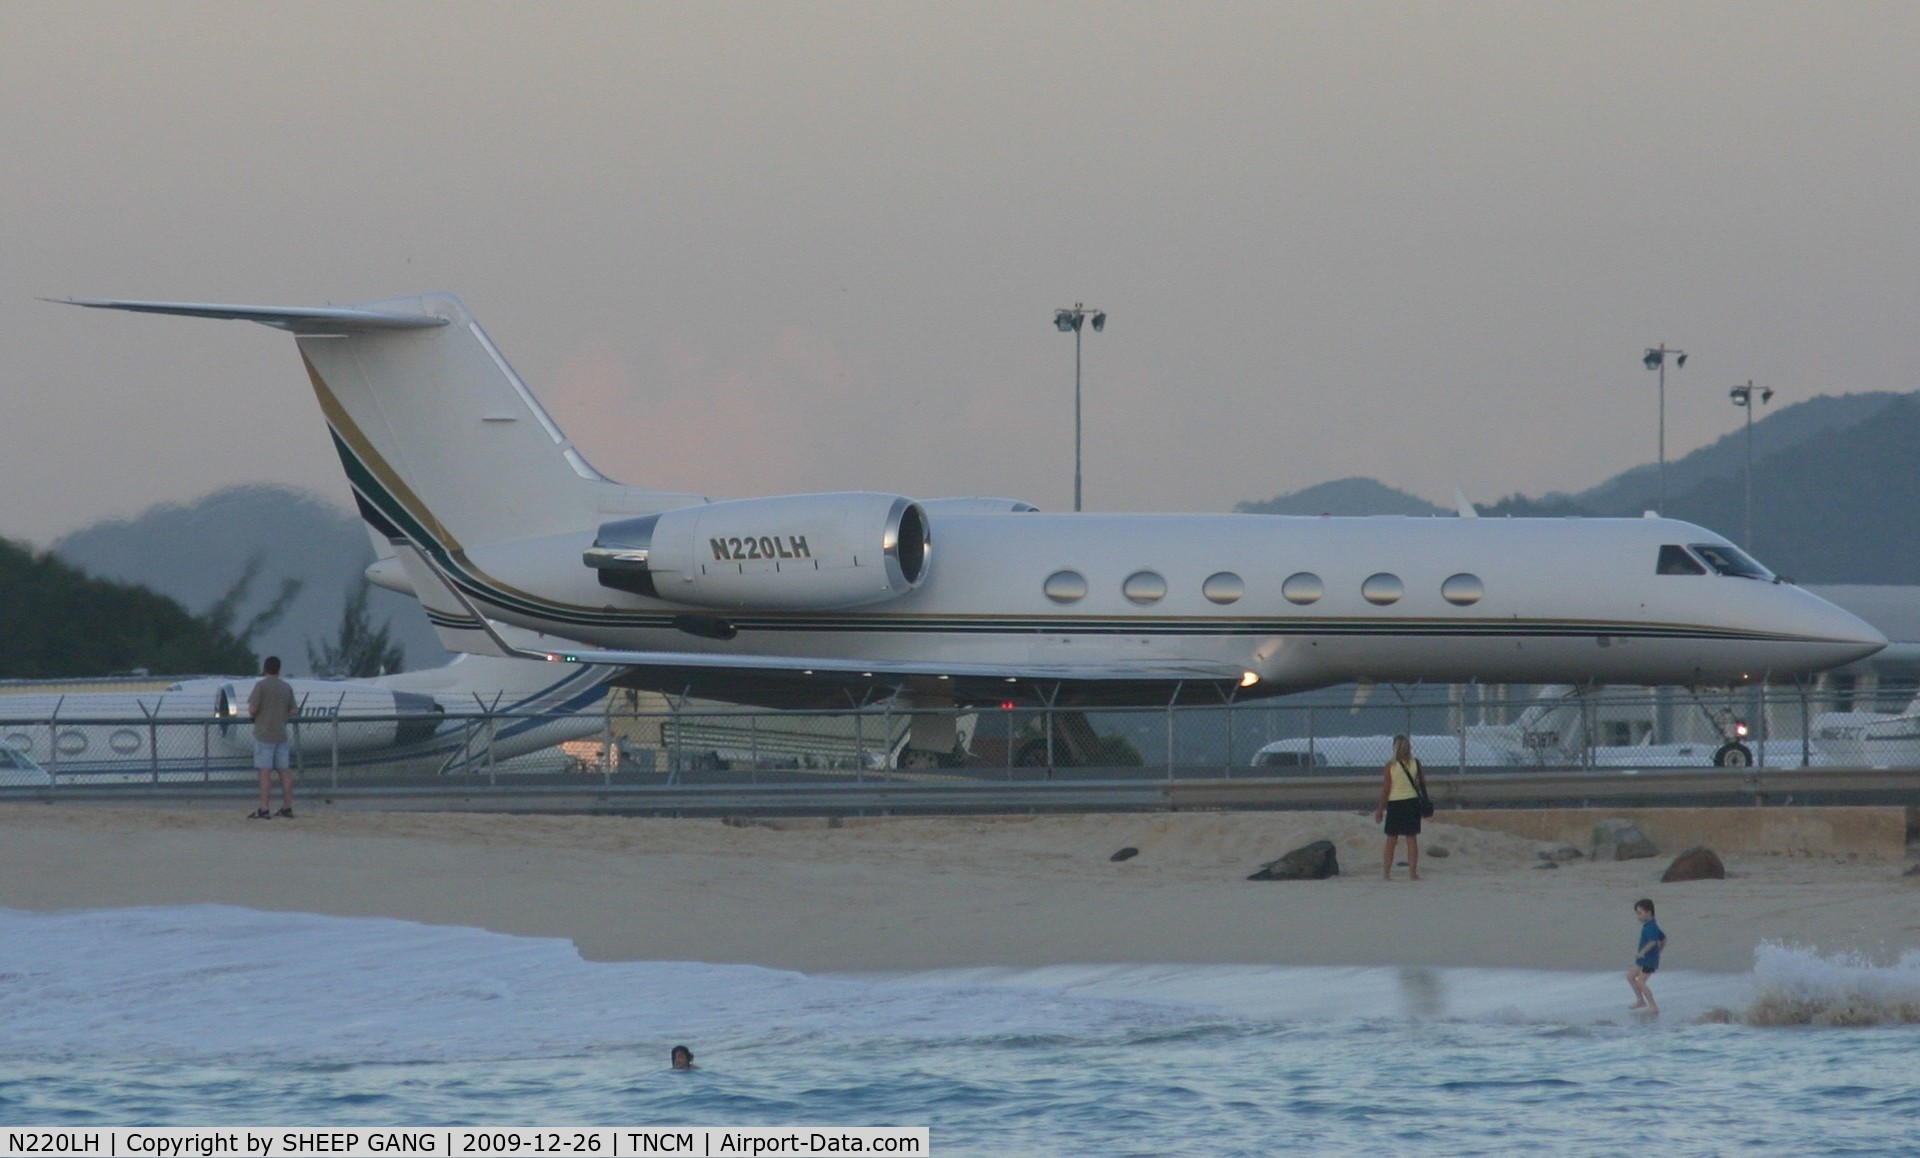 N220LH, 1987 Gulfstream Aerospace G-IV C/N 1054, N220LH at the tresh hold on runway 10 for departure